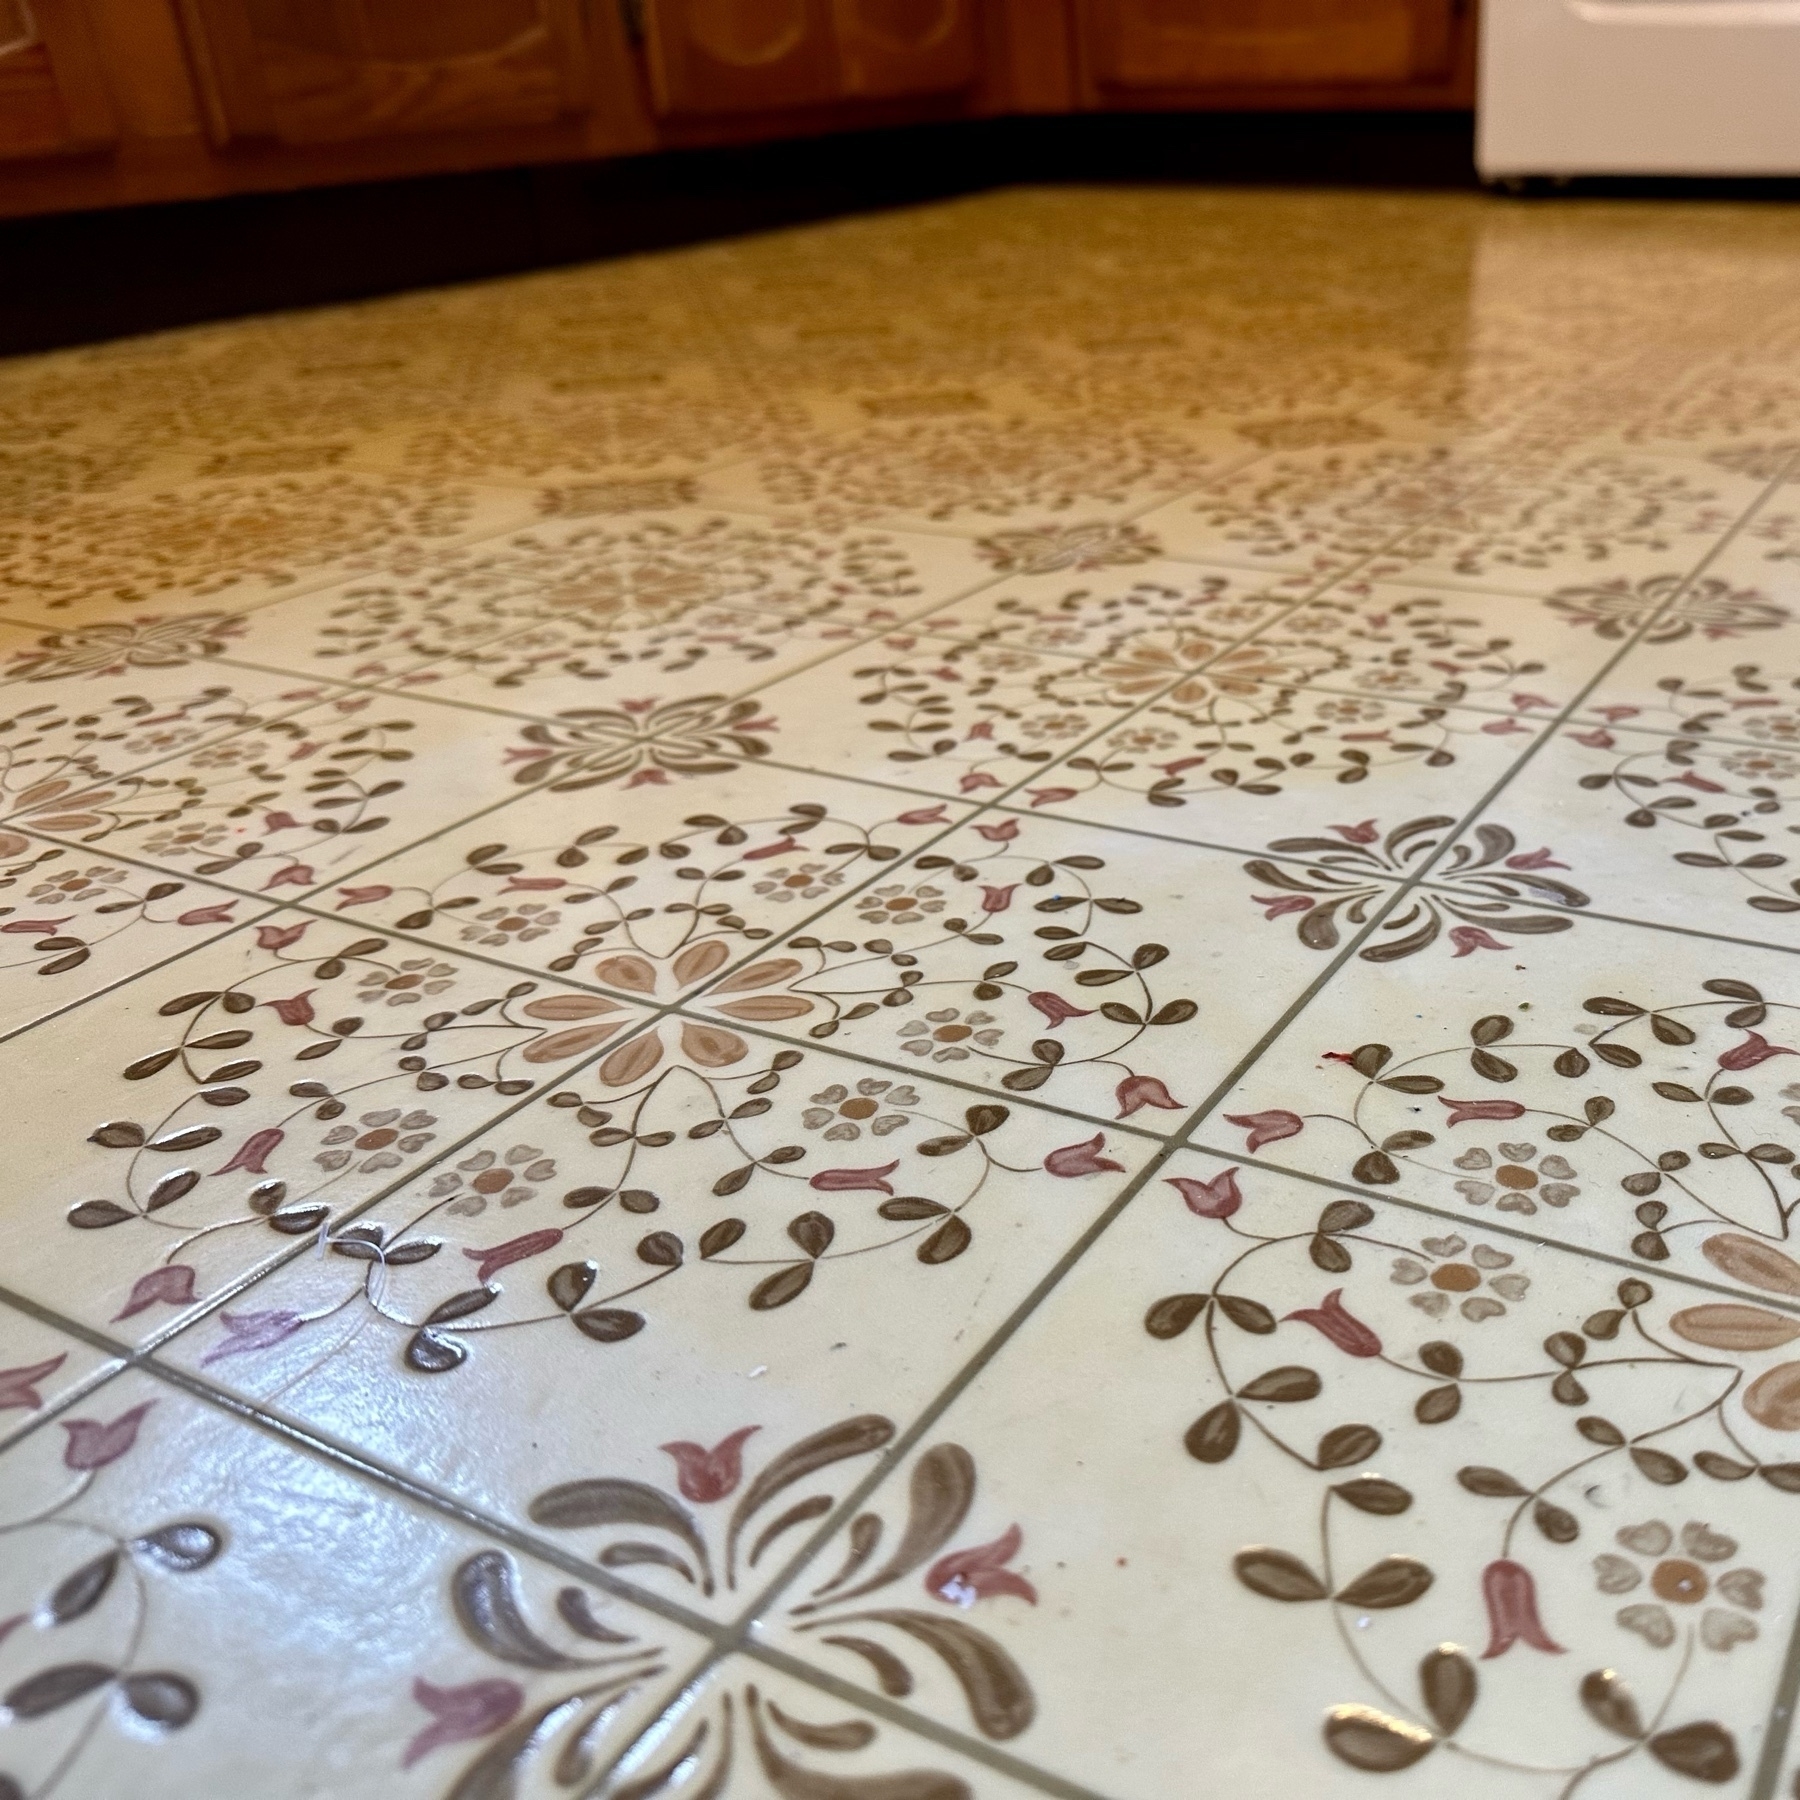 Photograph of laminate flooring with floral pattern in kitchen